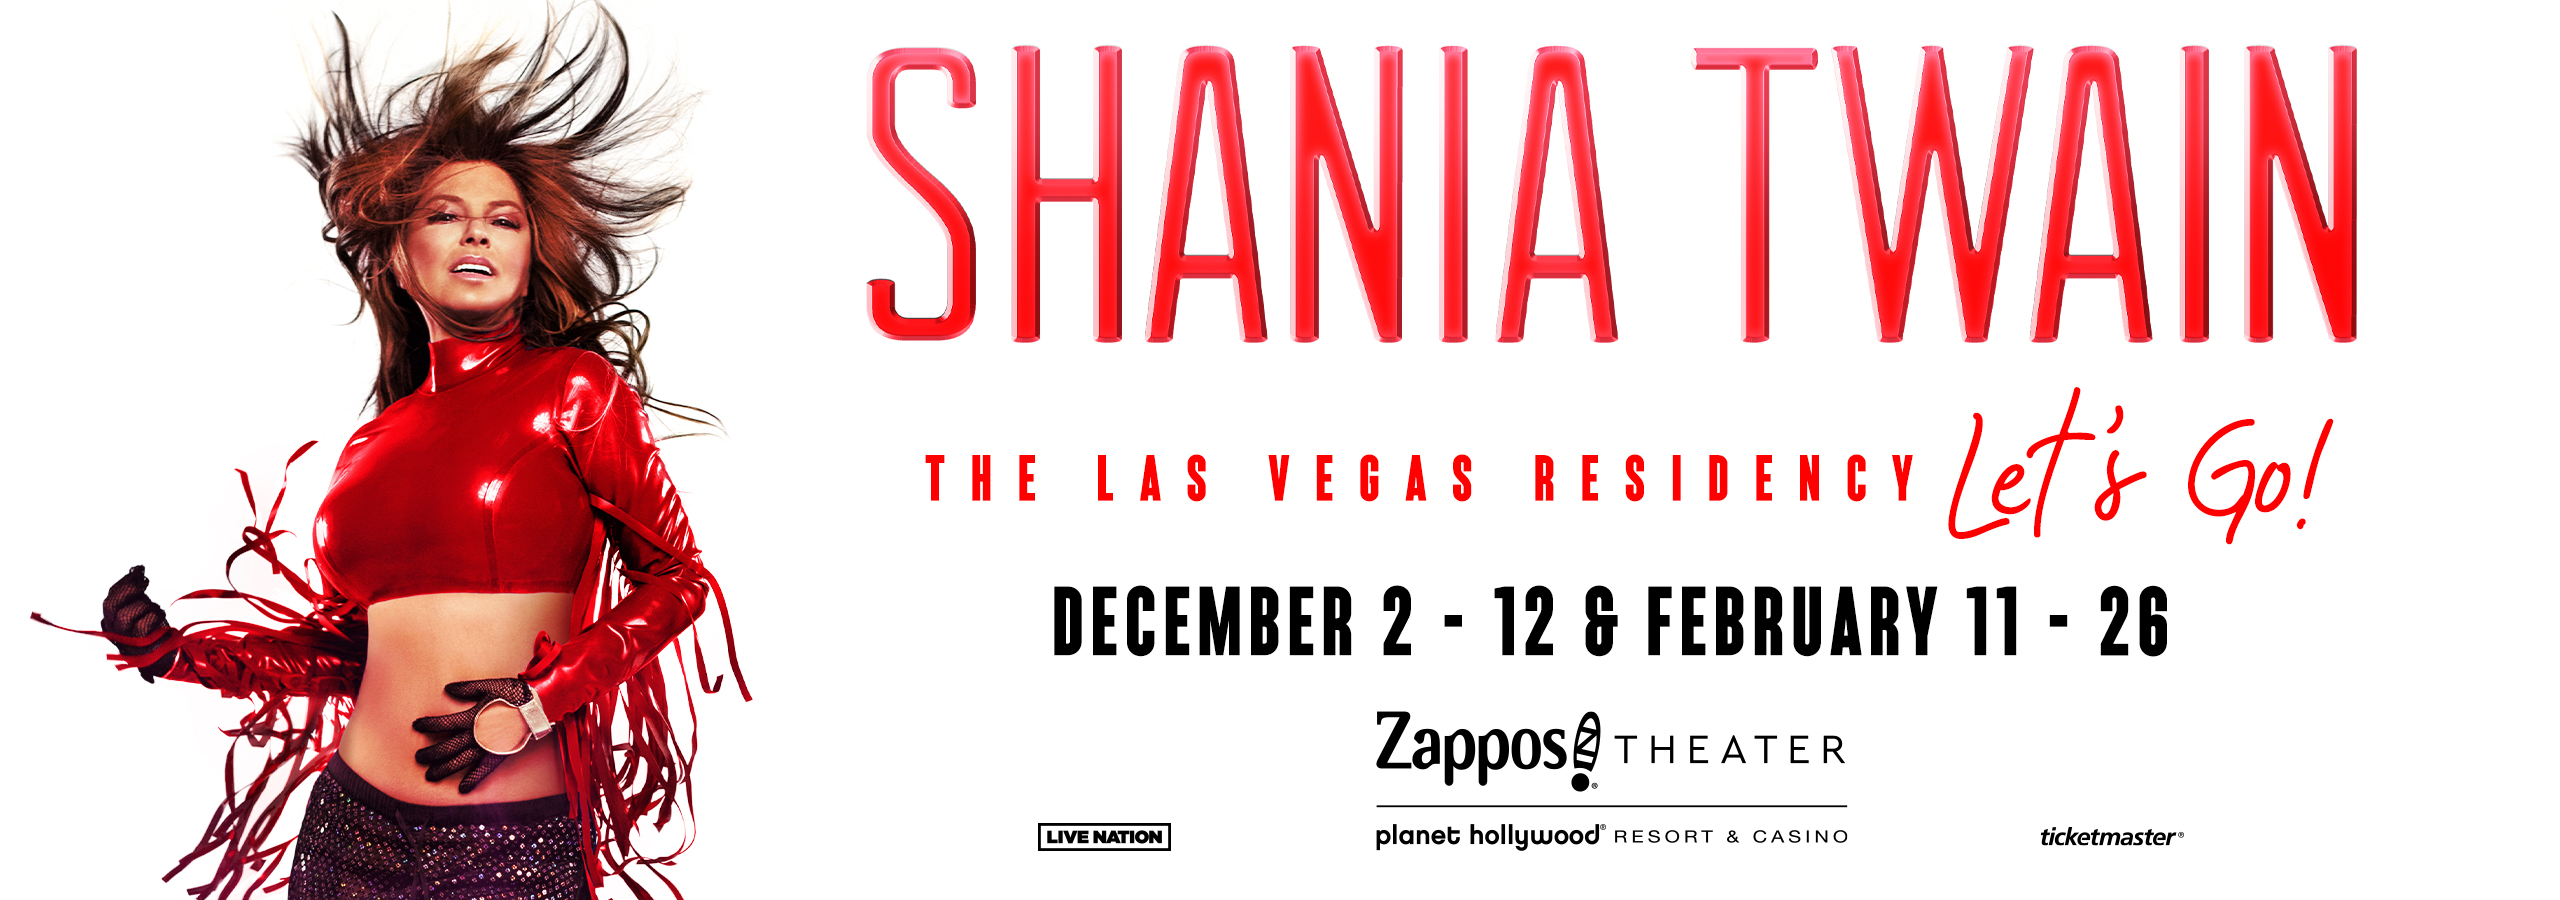 14 NEW SHOW DATES FOR SHANIA TWAIN “LET’S GO!” THE LAS VEGAS RESIDENCY ...